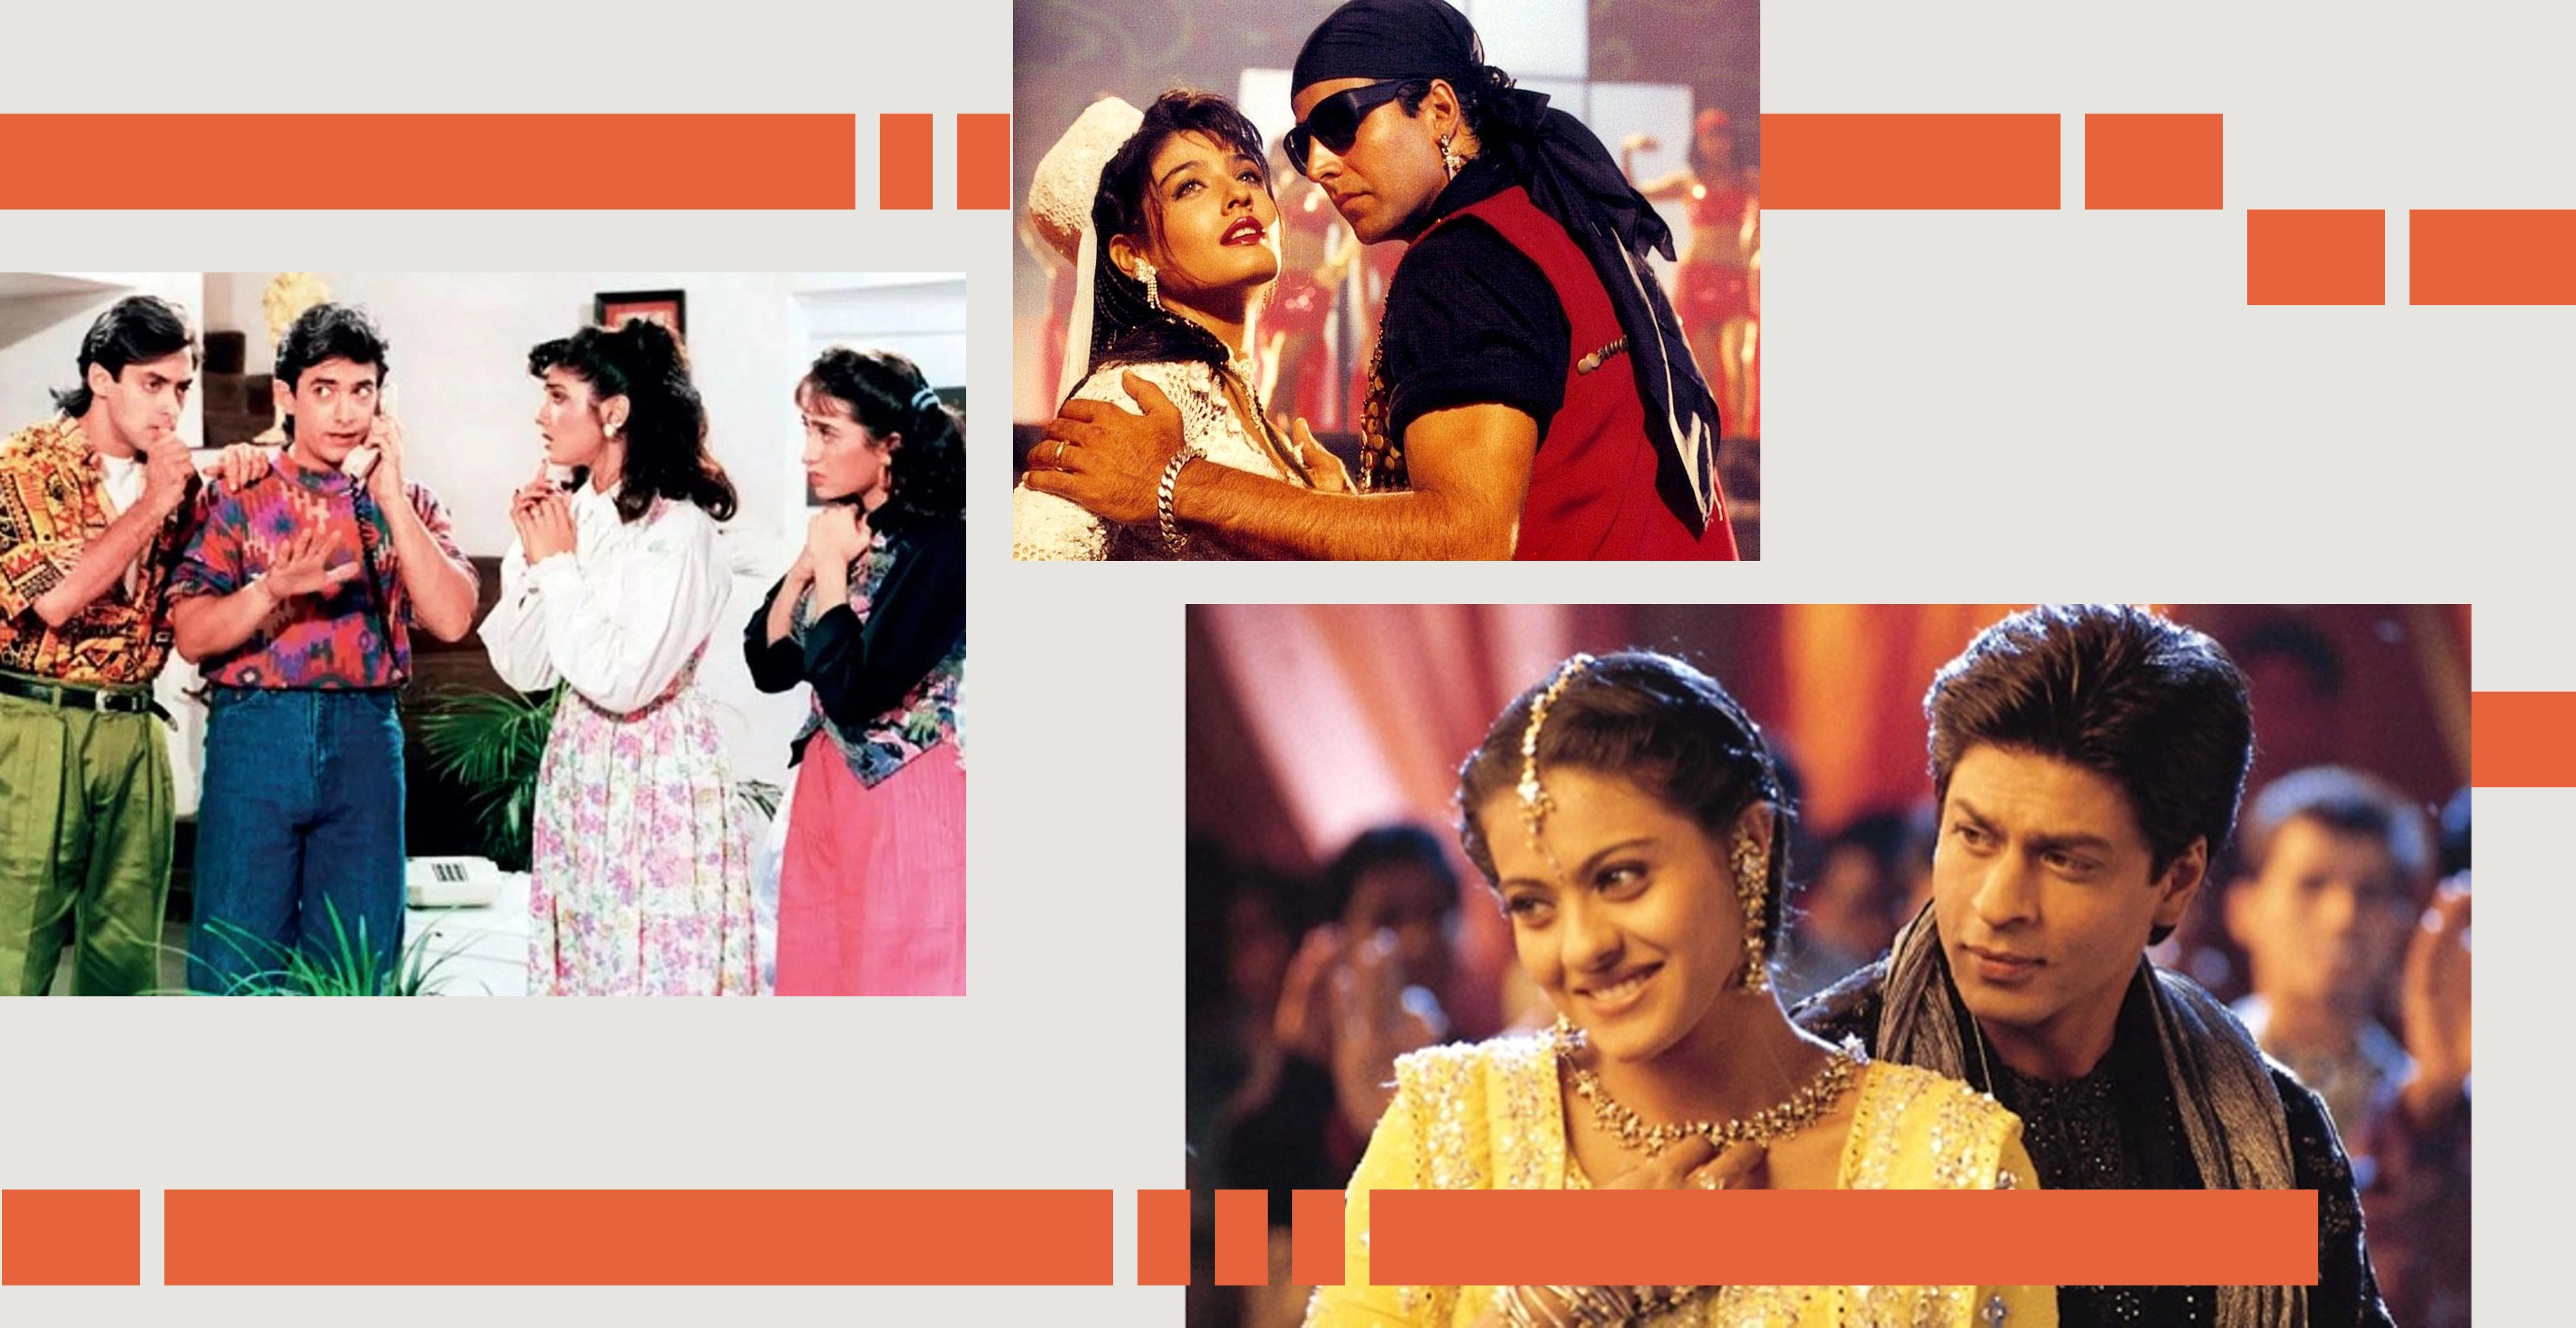 American silhouettes started to be seen more and more in Bollywood, as it shifted towards Western consumption patterns in the 90s and 00s